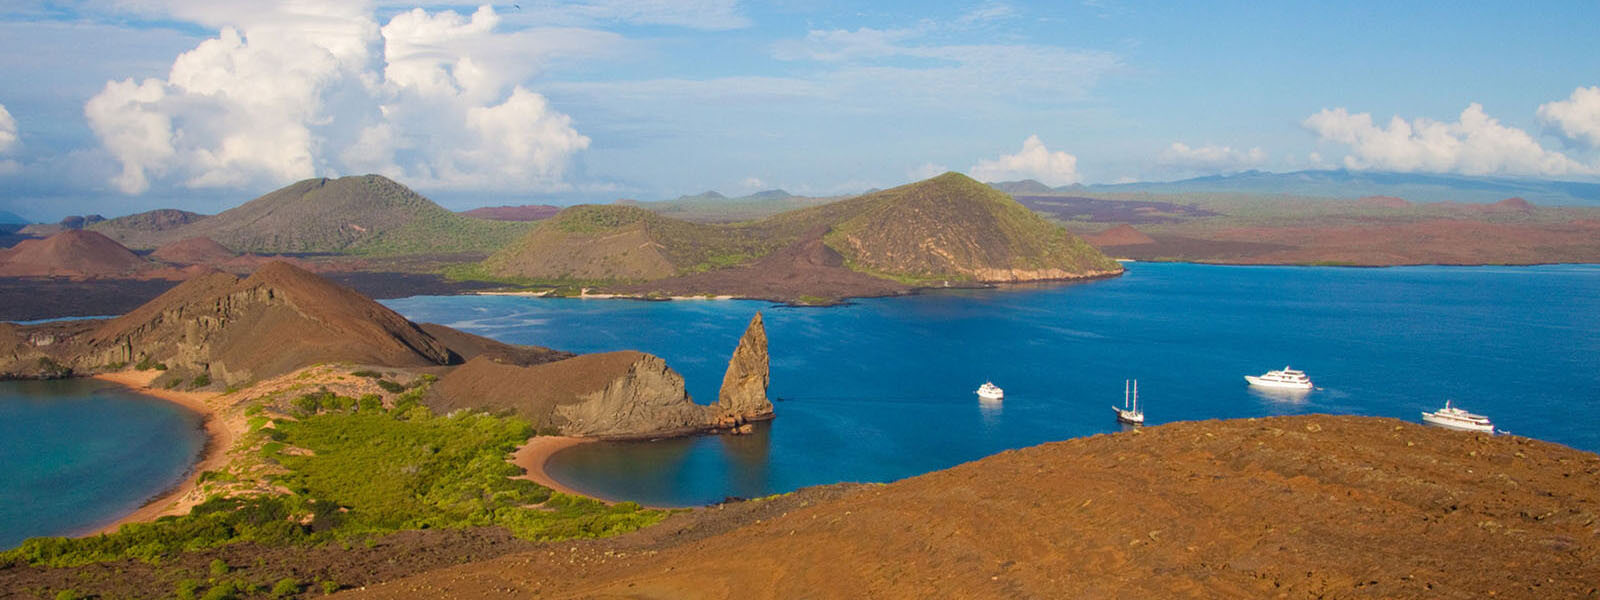 Galapagos islands view from Bartolome that we'll visit on our coral triangle adventures snorkeling tour